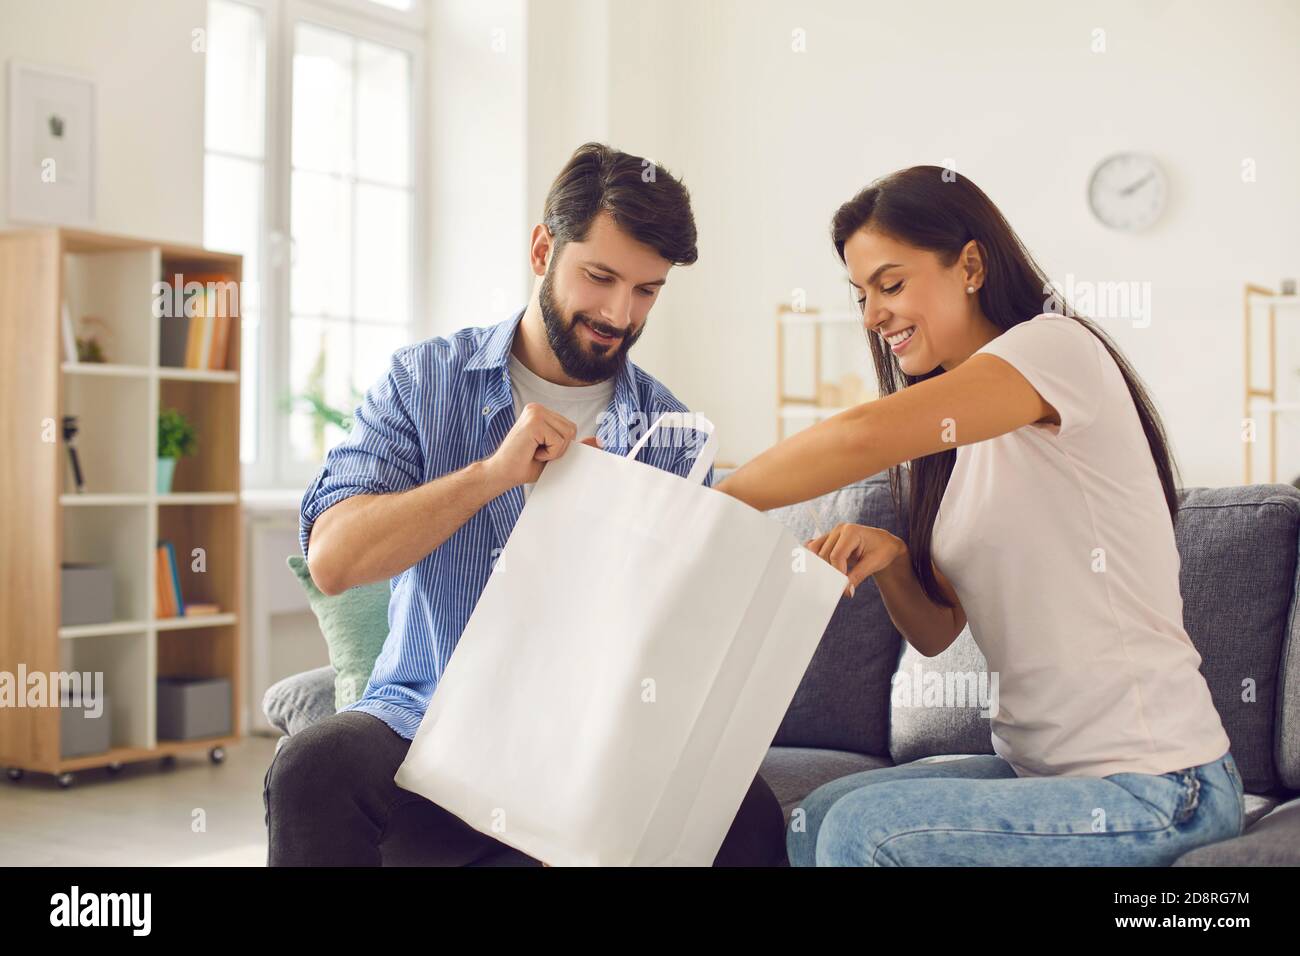 Happy young couple sitting on couch with paper bag and unpacking fresh takeaway food Stock Photo